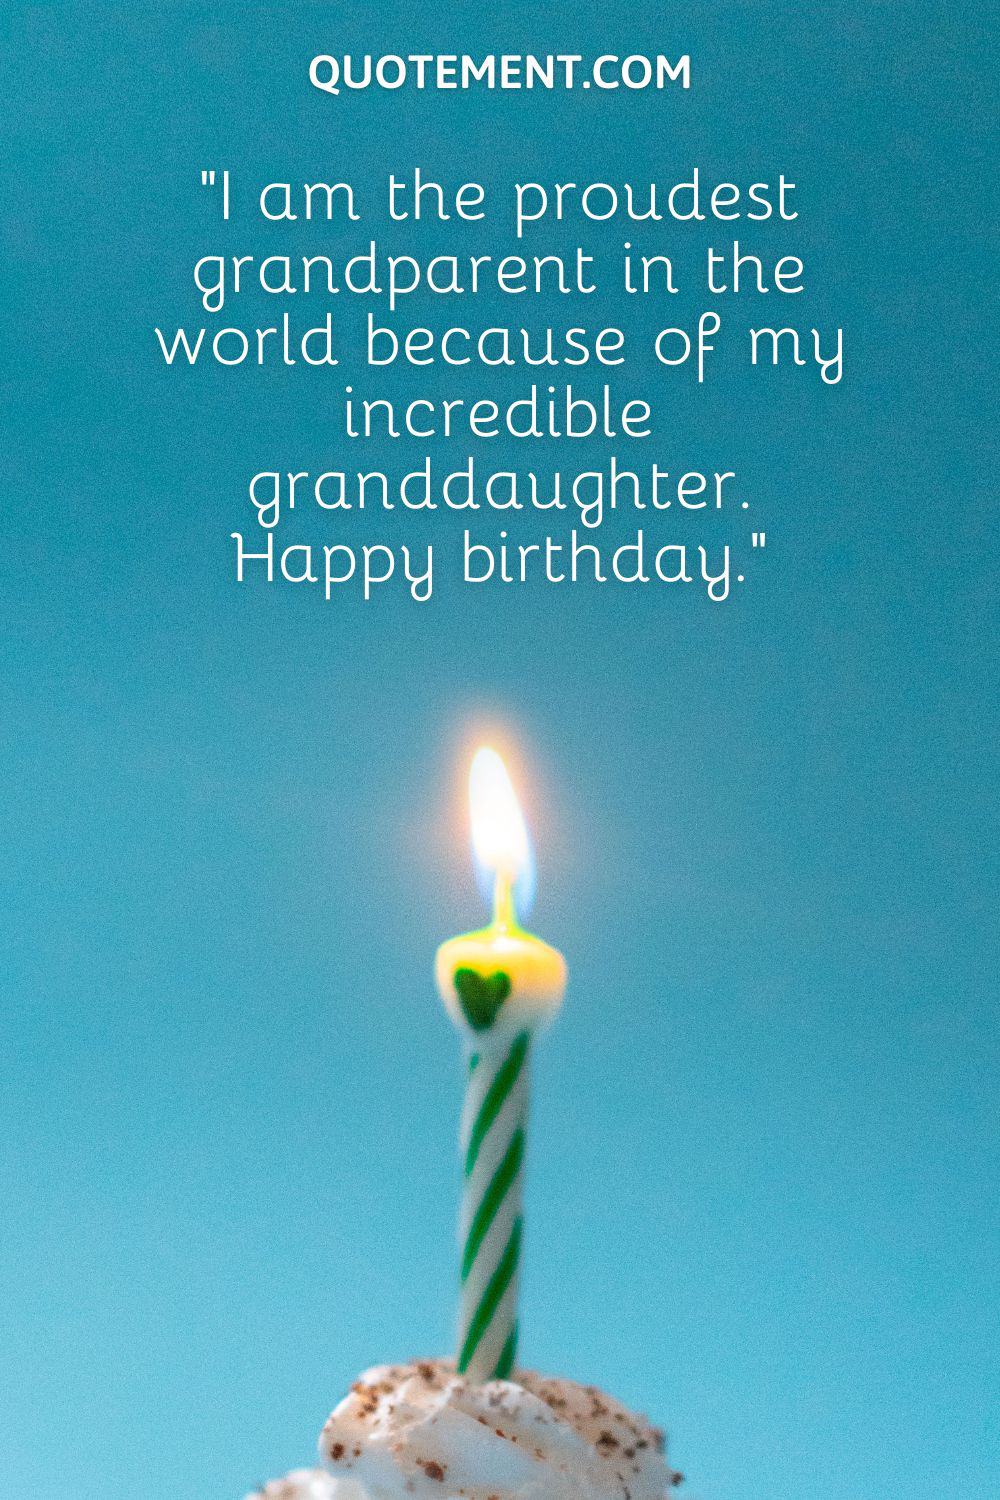 “I am the proudest grandparent in the world because of my incredible granddaughter. Happy birthday.”